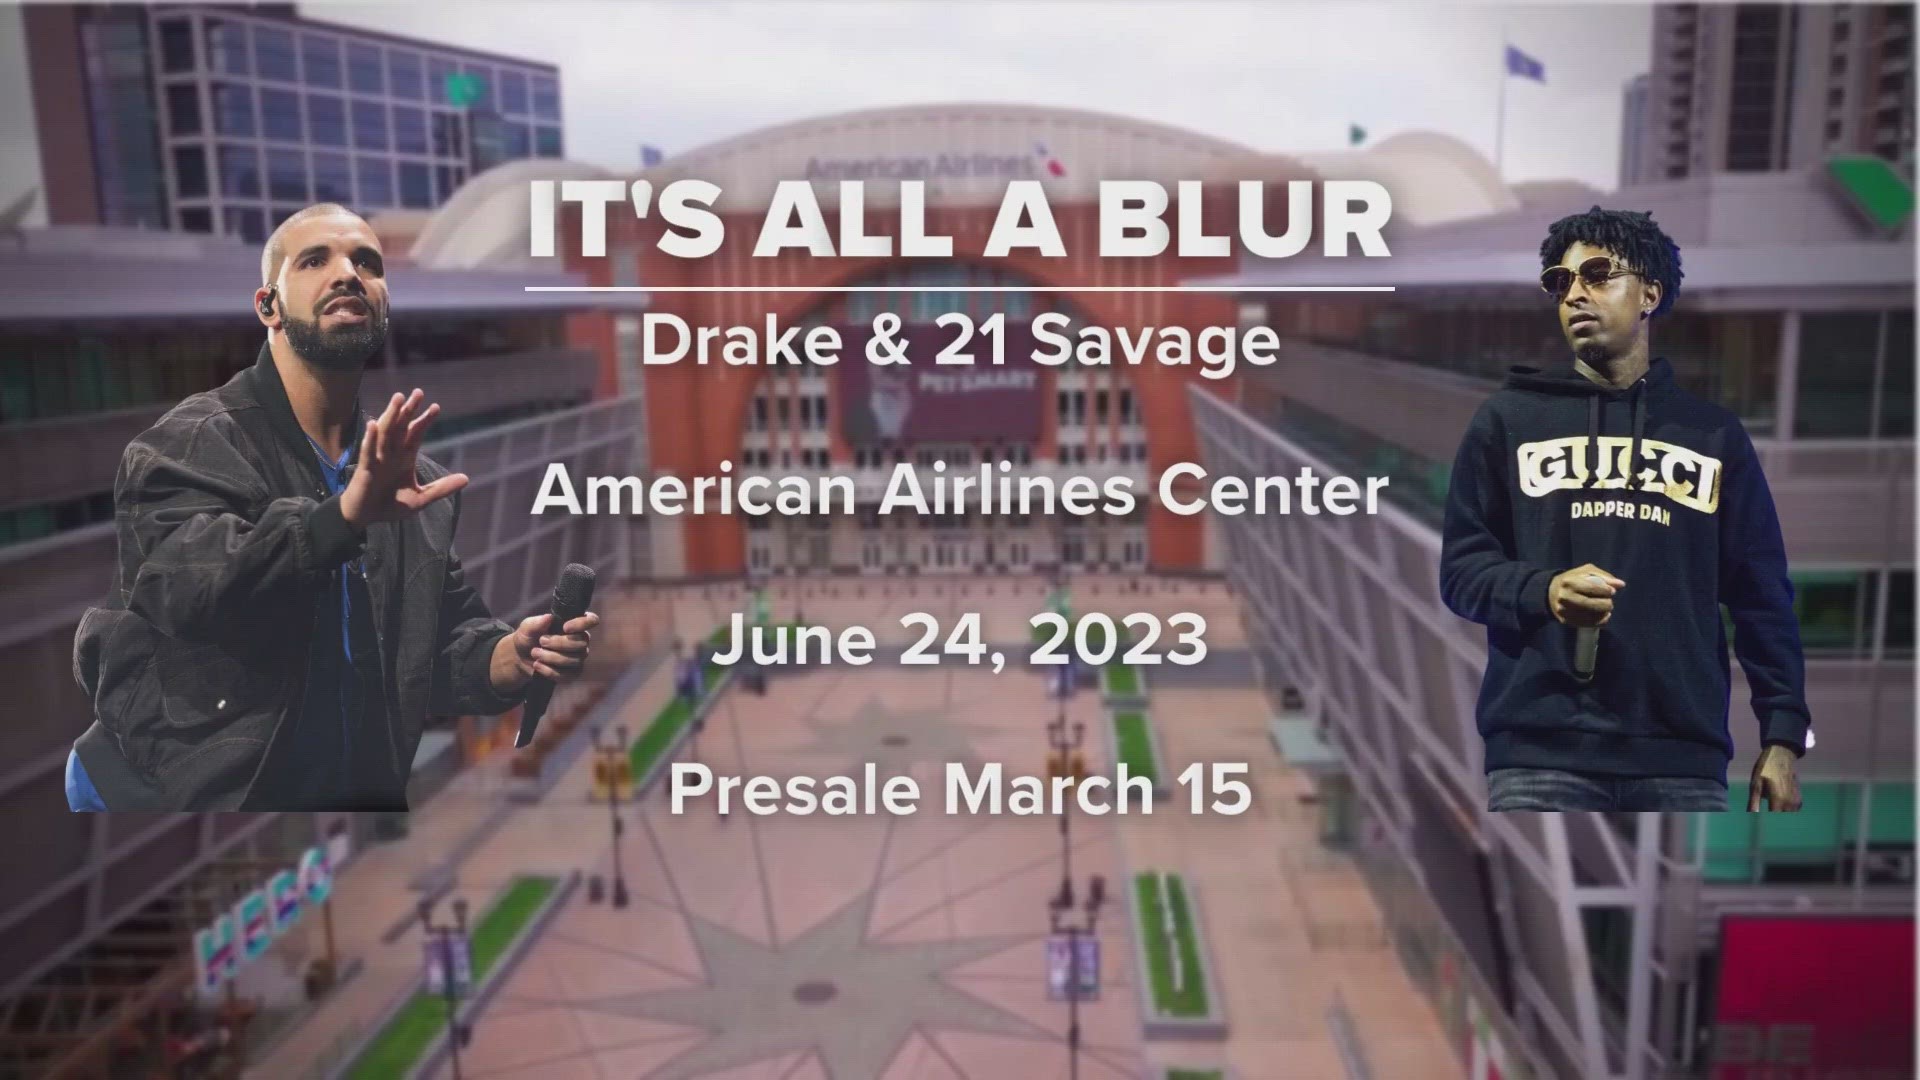 The two rappers will stop in Houston and Dallas this summer during their "It's All A Blur" tour.